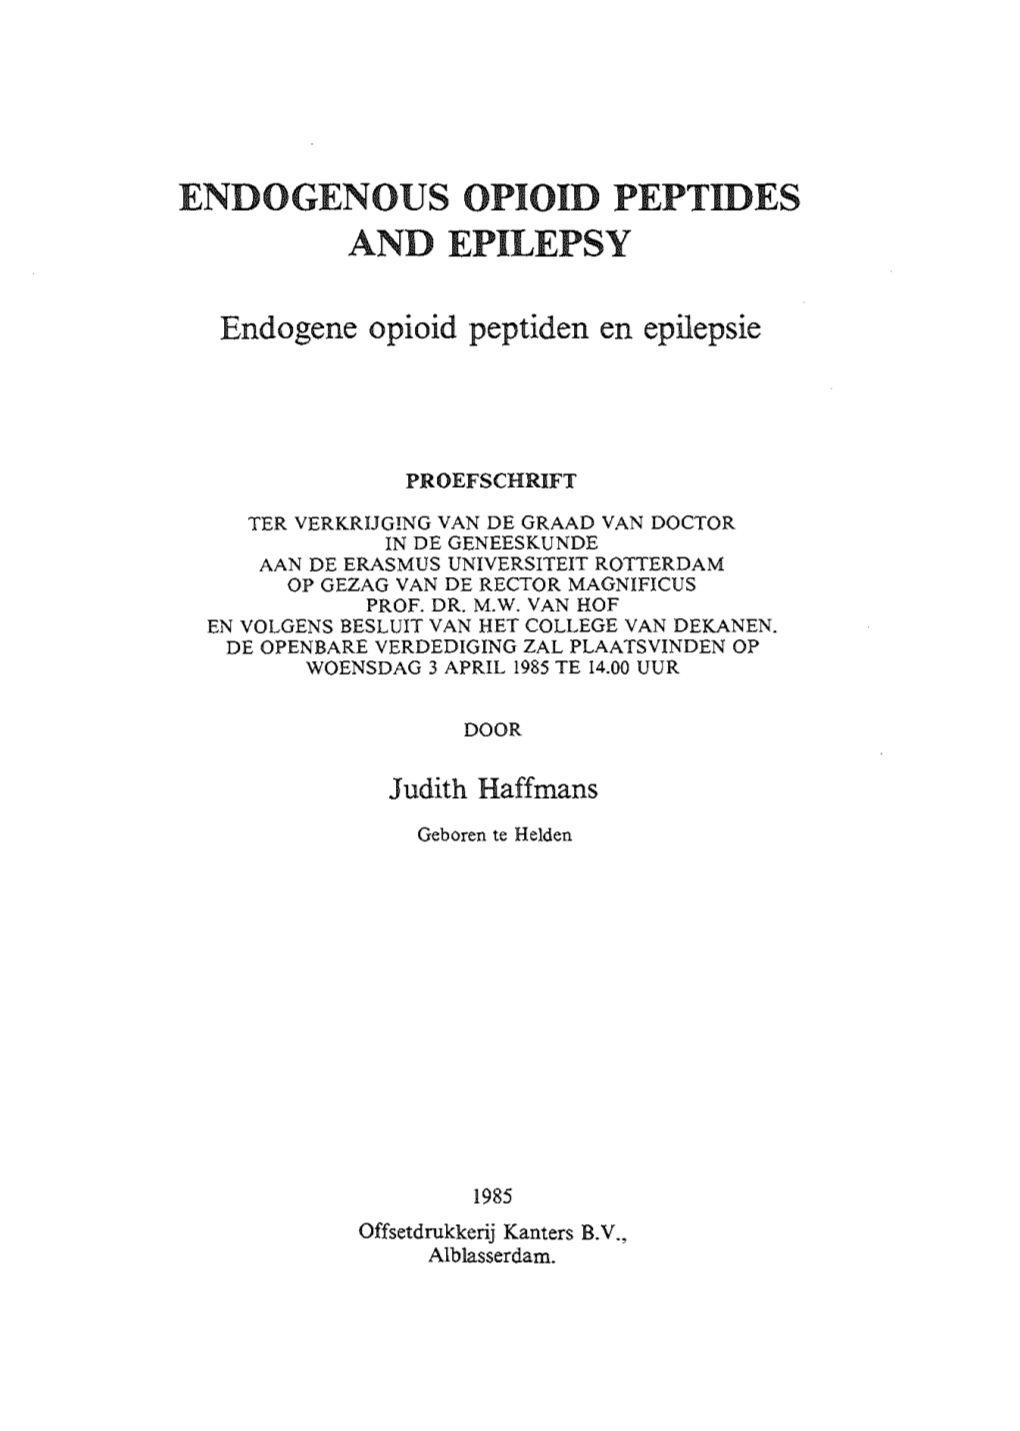 Endogenous Opioid Peptides and Epilepsy